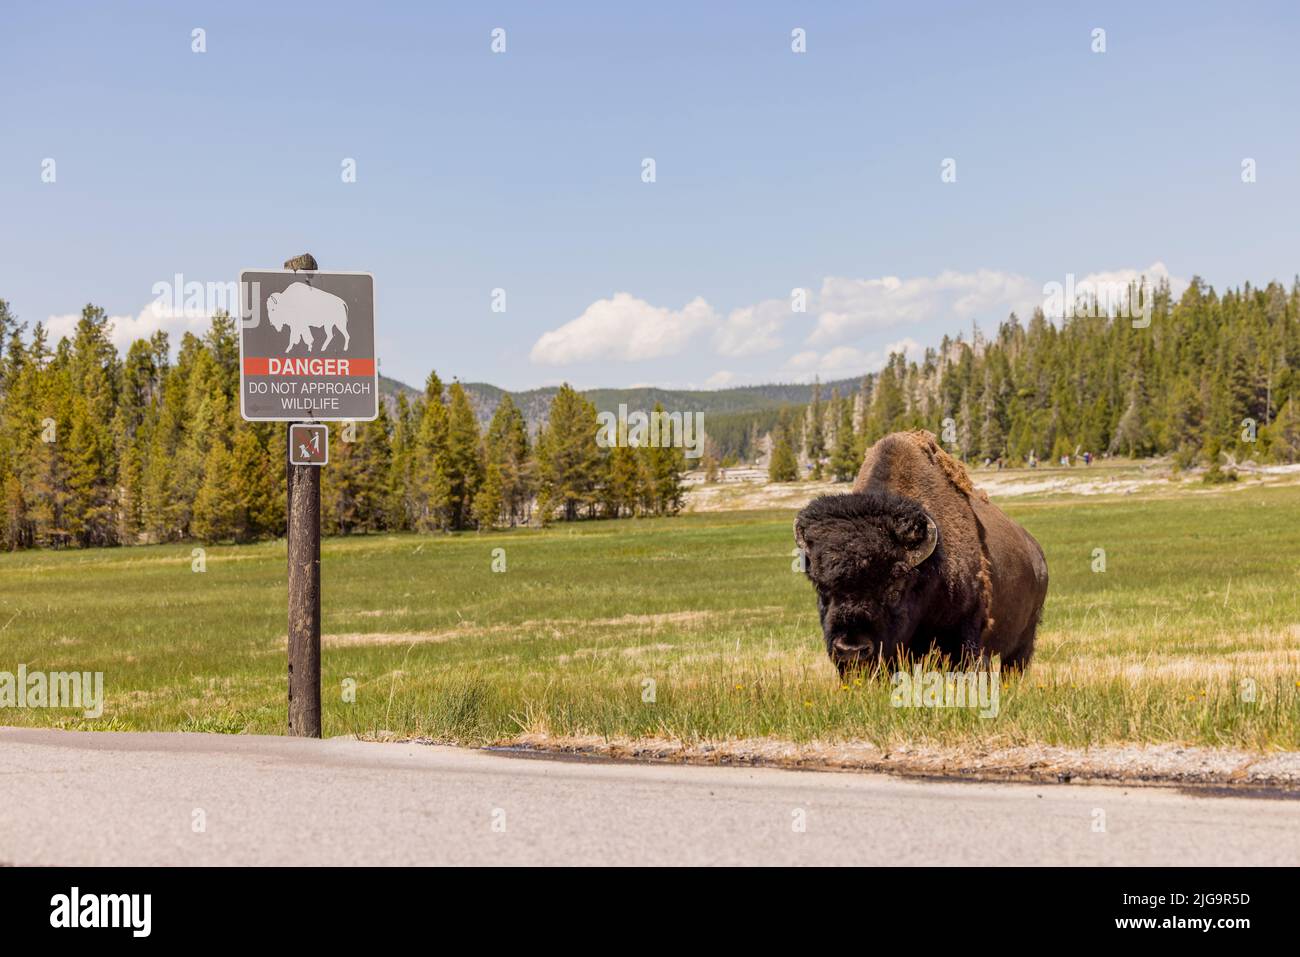 An American Bison approaching a Danger sign warning tourists to not approach the Wild Life. Stock Photo